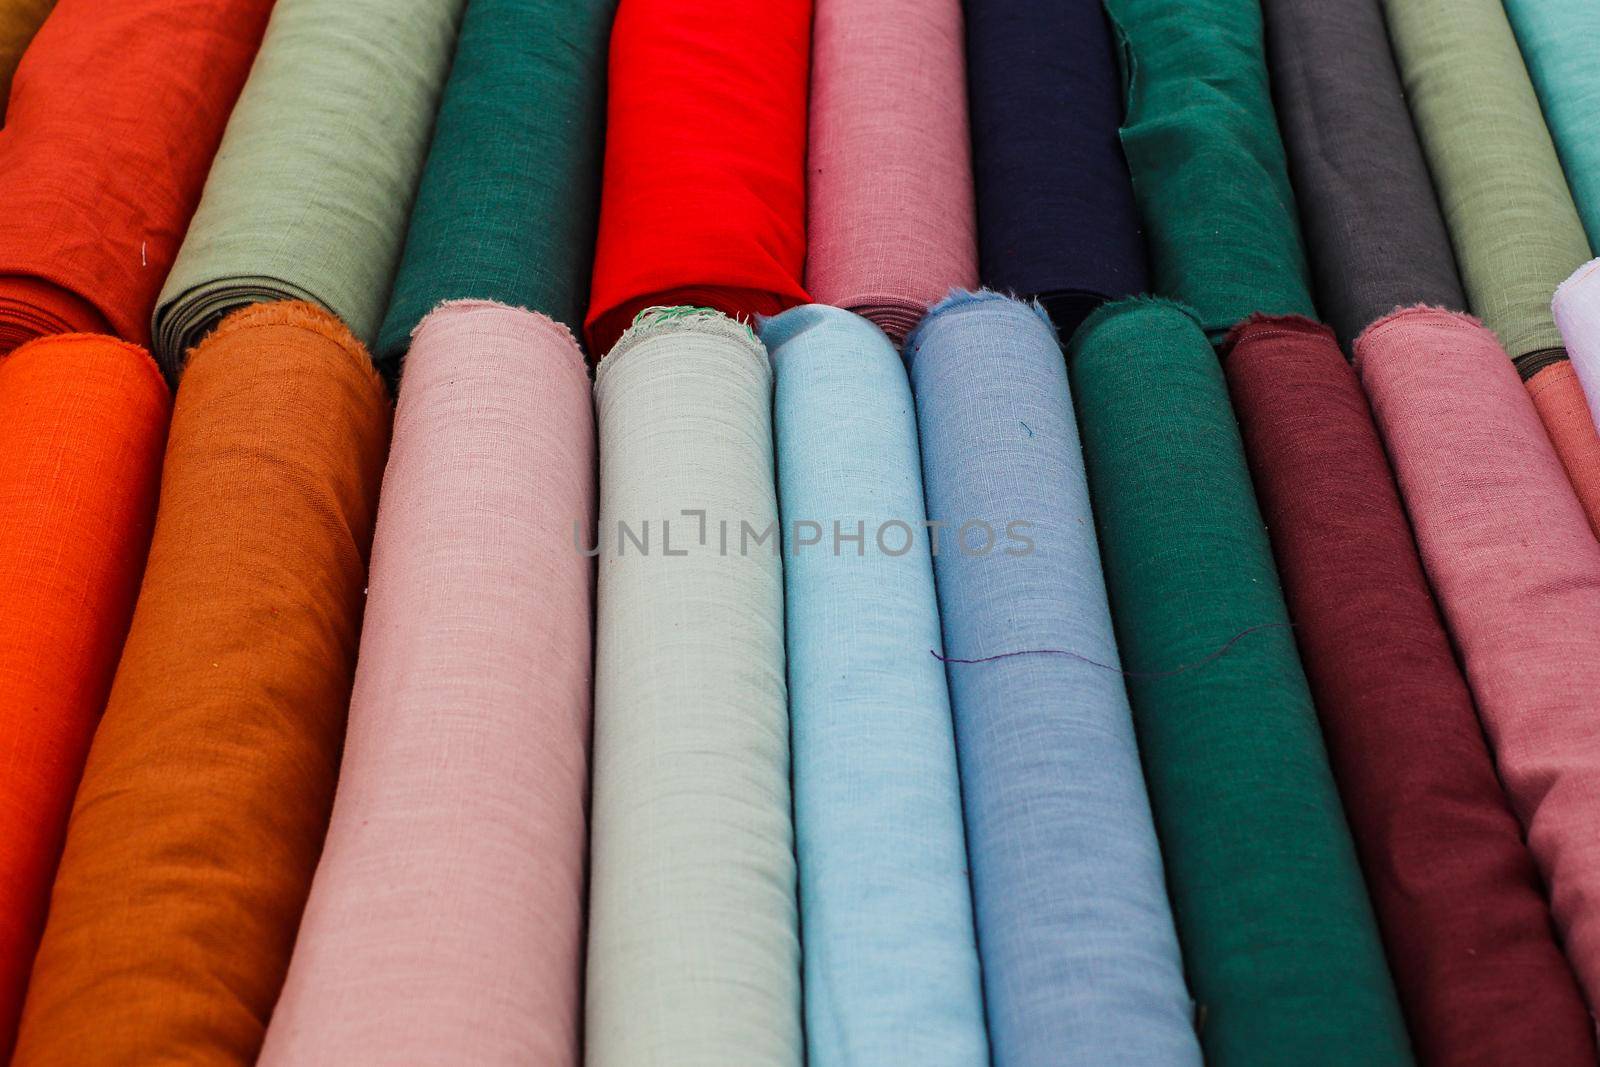 Detailed close up view on samples of cloth and fabrics in different colors found at a fabrics market by MP_foto71